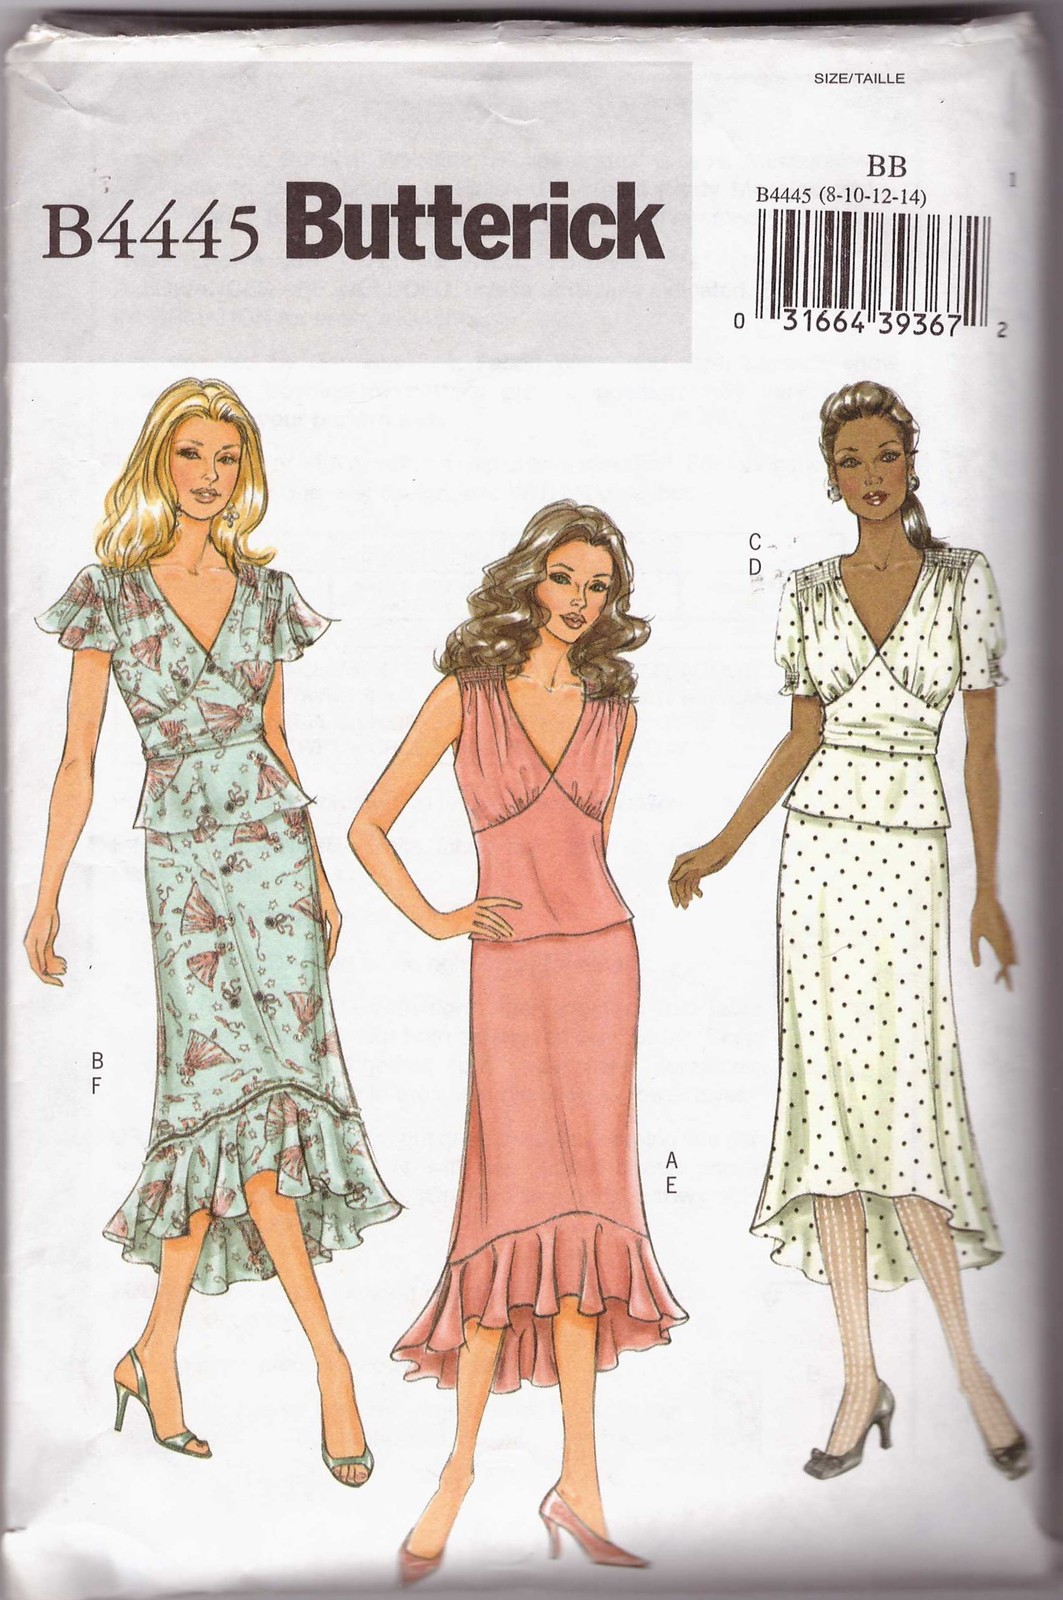 Butterick Sewing Pattern 4445 Misses Womens Top Skirt Dress Size 8 10 12 14 New - £7.98 GBP